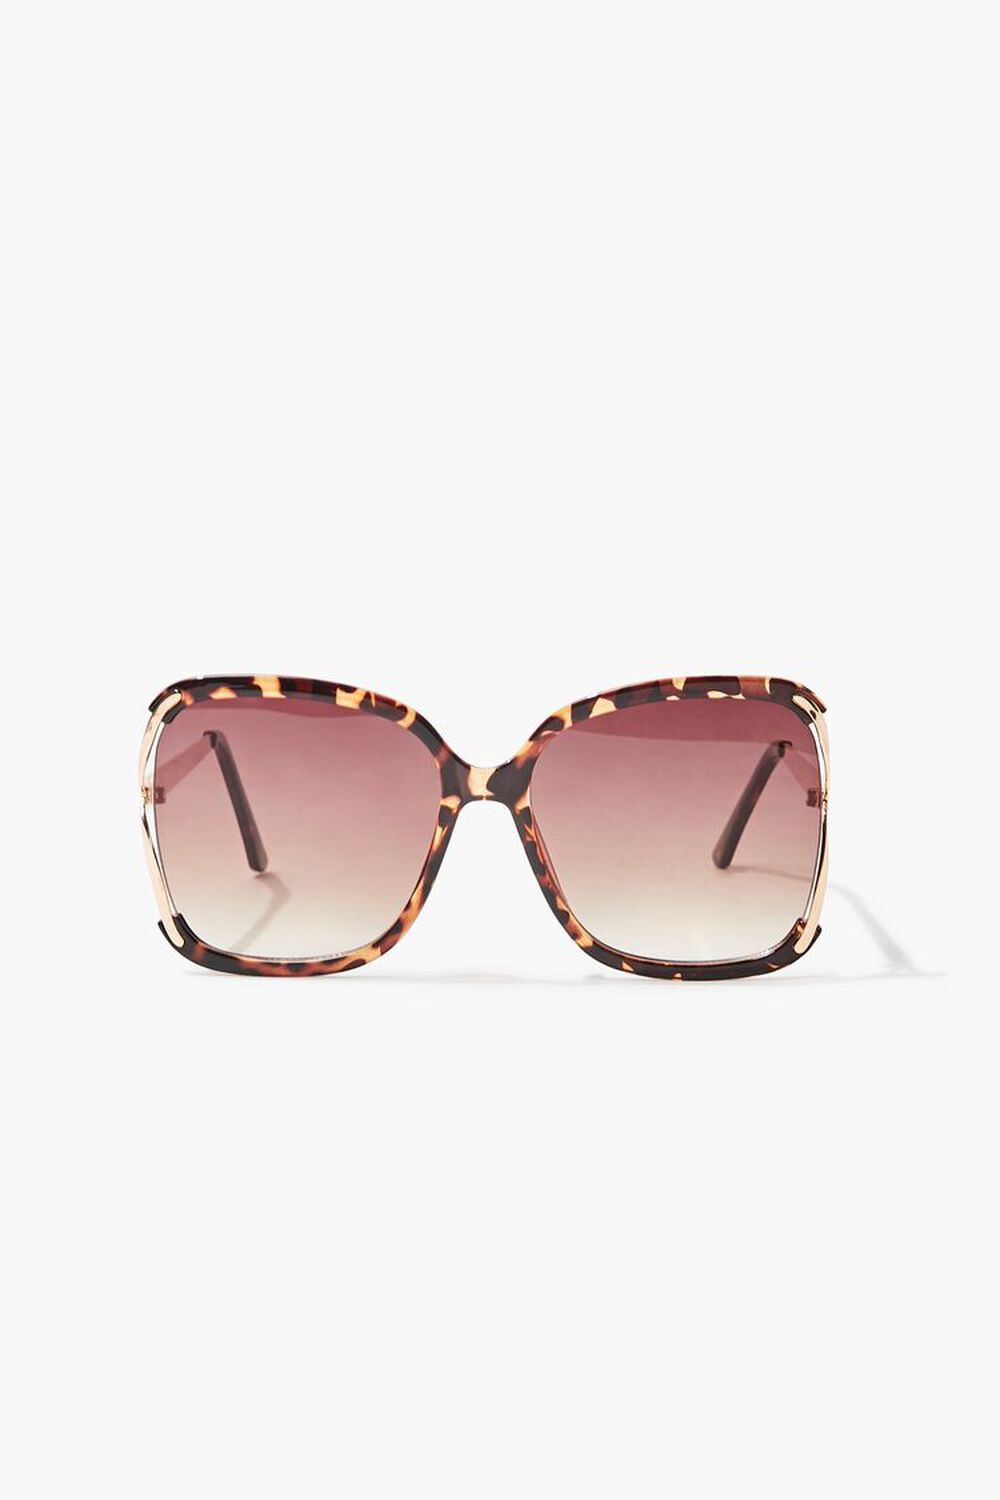 BROWN/BROWN Square Tinted Sunglasses, image 1